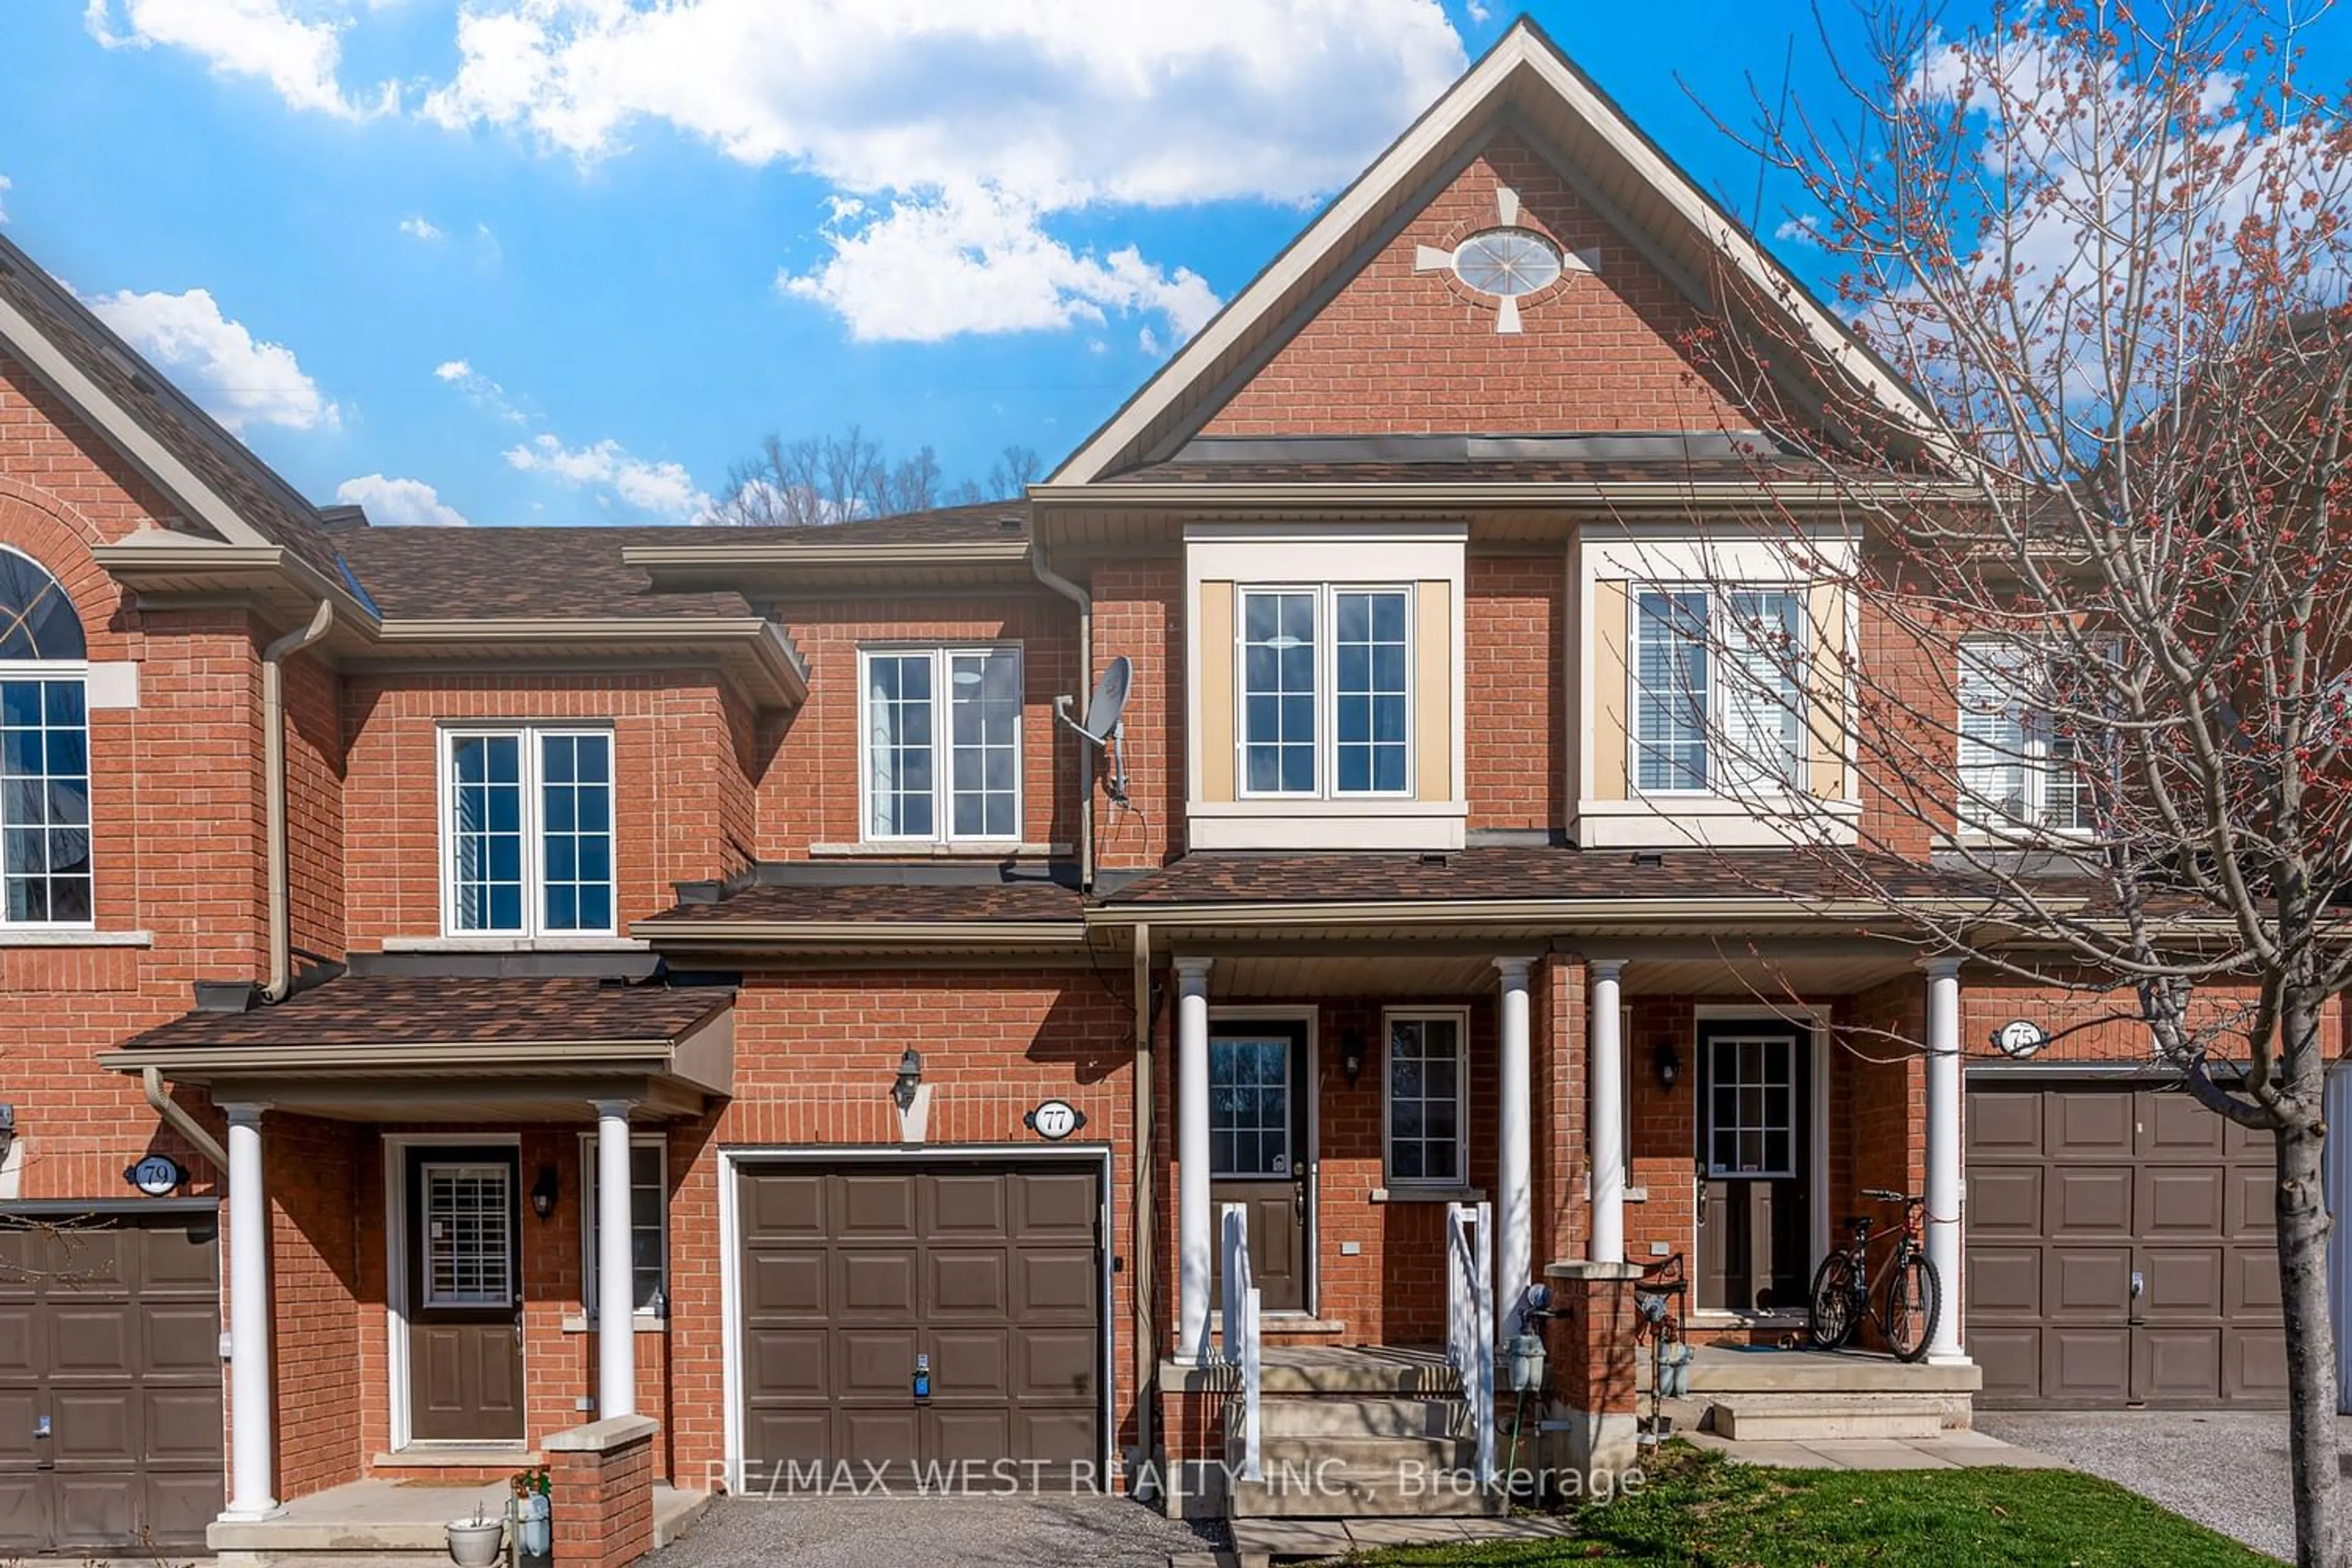 Home with brick exterior material for 7360 Zinnia Pl #77, Mississauga Ontario L5W 2A4